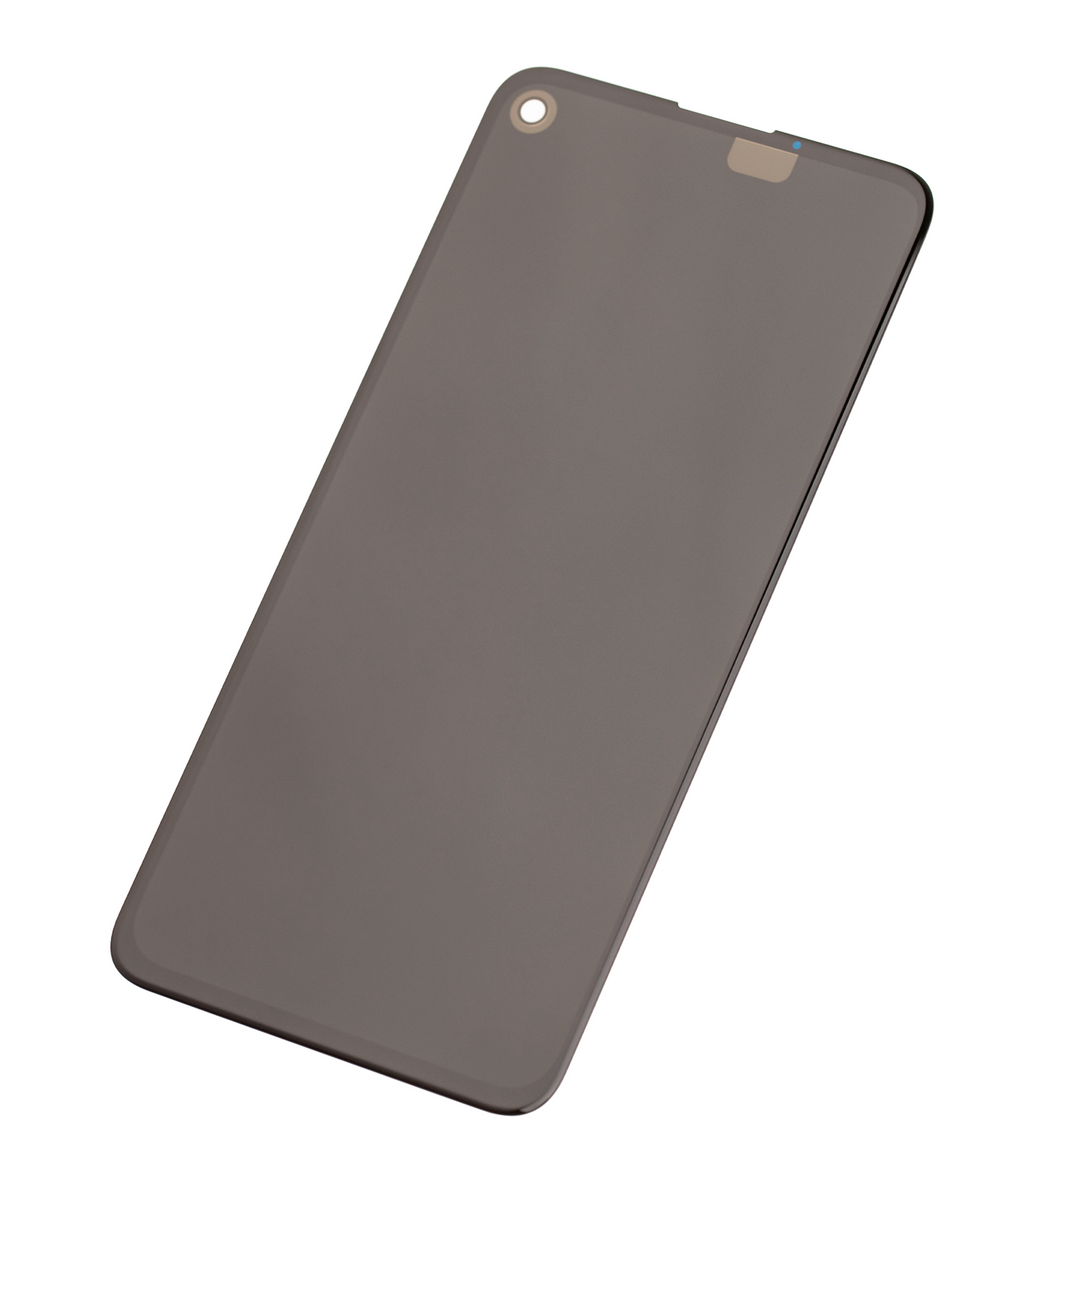 LCD ASSEMBLY WITHOUT FRAME COMPATIBLE FOR GOOGLE PIXEL 4A 5G (GENUINE OEM)